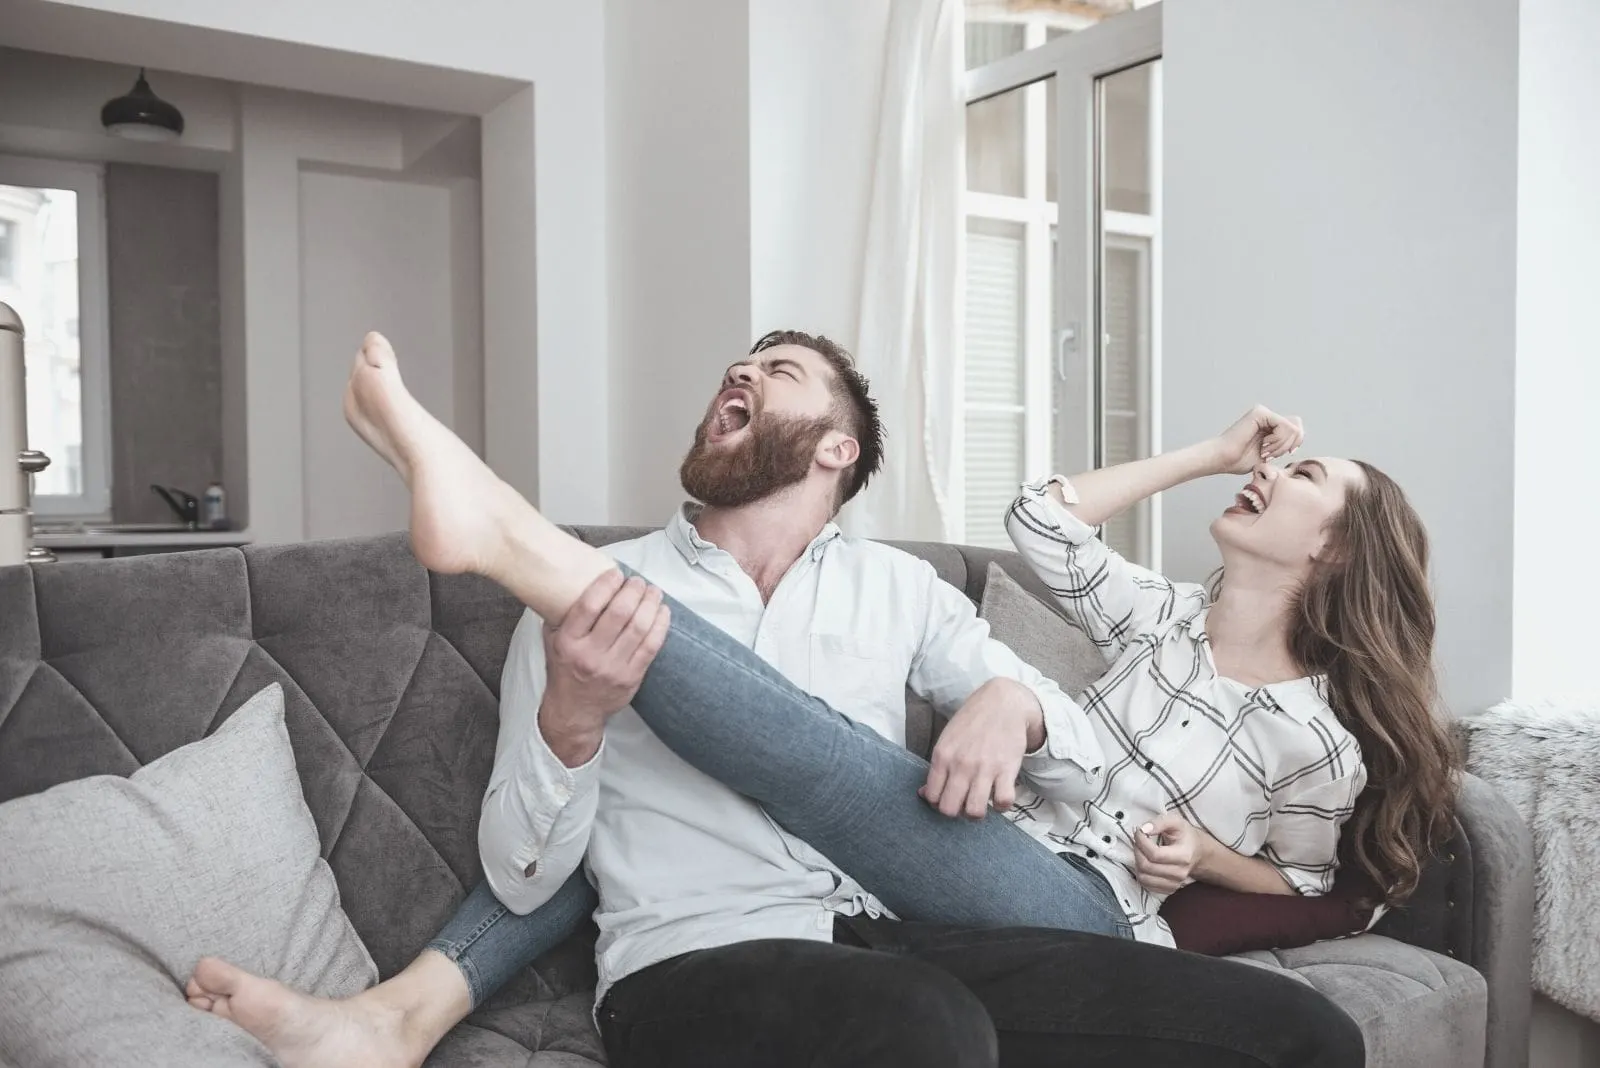 lovely funny couple sitting in sofa with the man imagining the woman's leg is a guitar